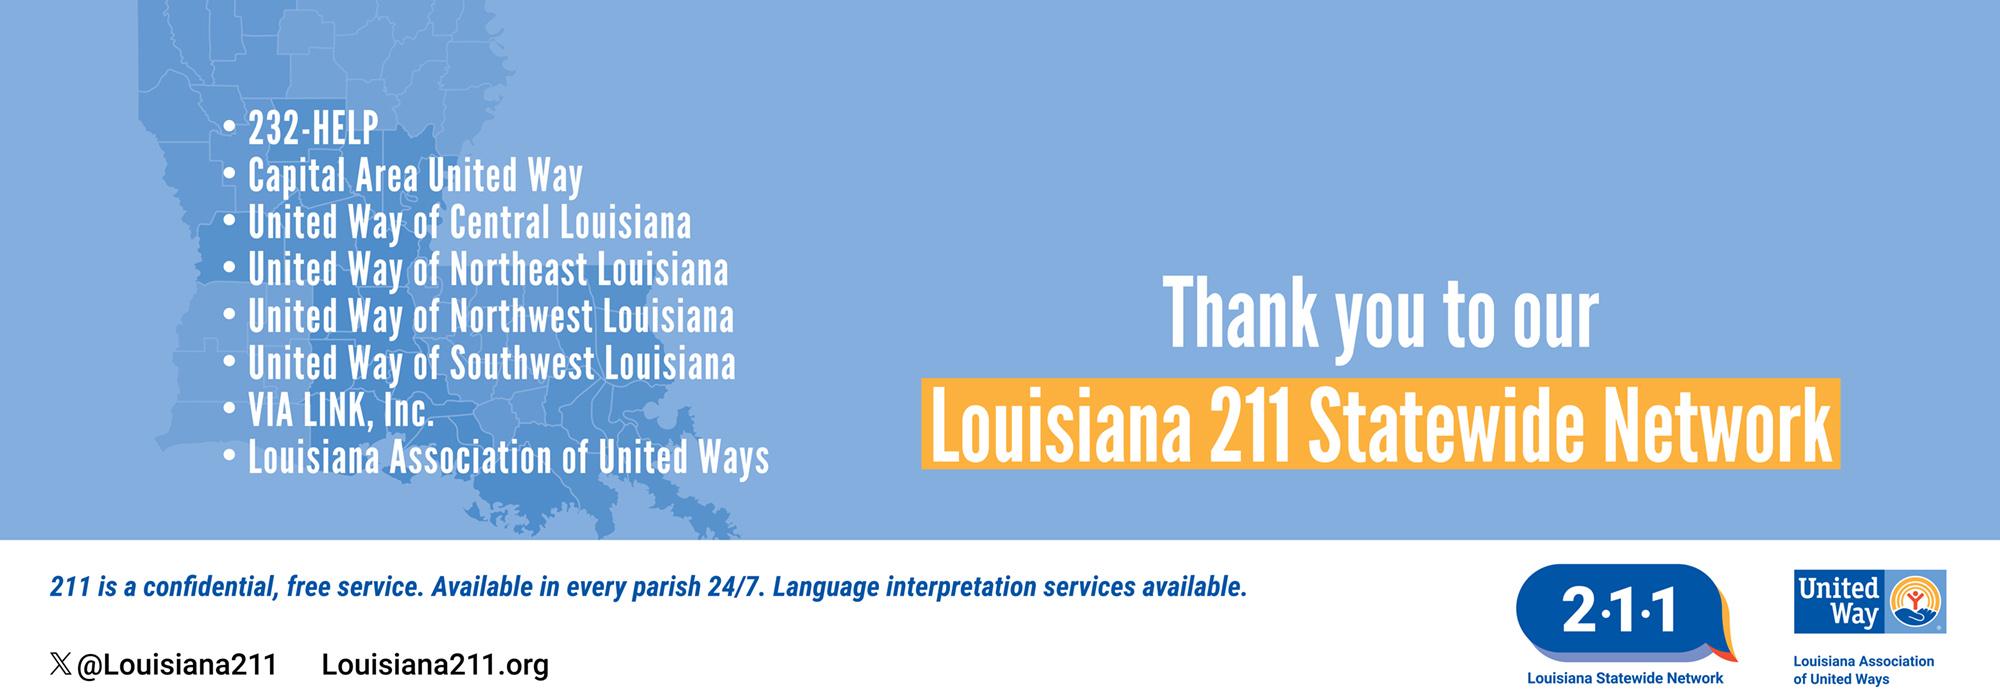 Image of Louisiana with a thank you message to Louisiana 211 Statewide Network